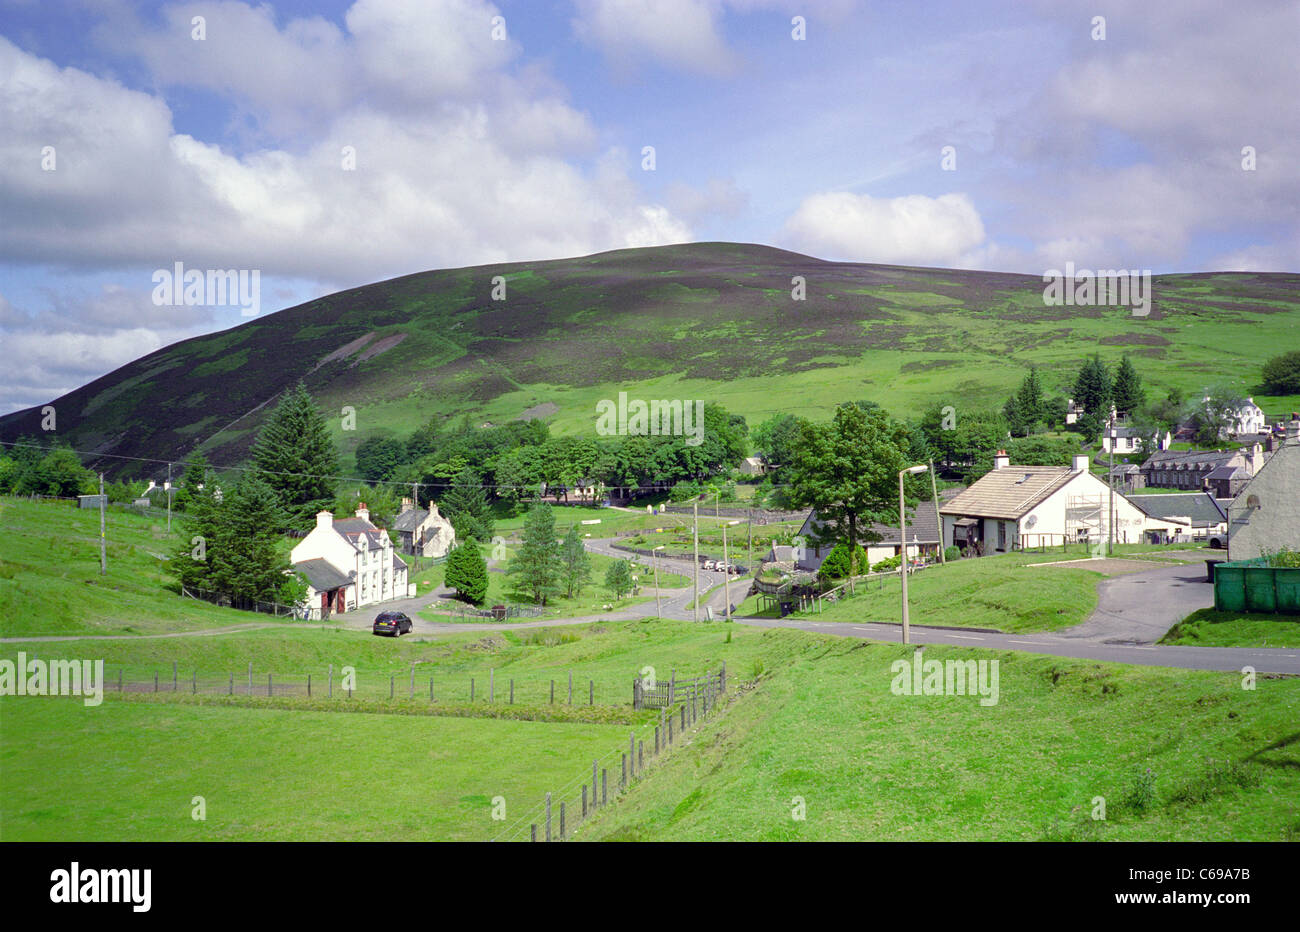 Village of Wanlockhead nestled in the Lowther Hills, Nithsdale, Dumfries and Galloway, Scotland, UK Stock Photo